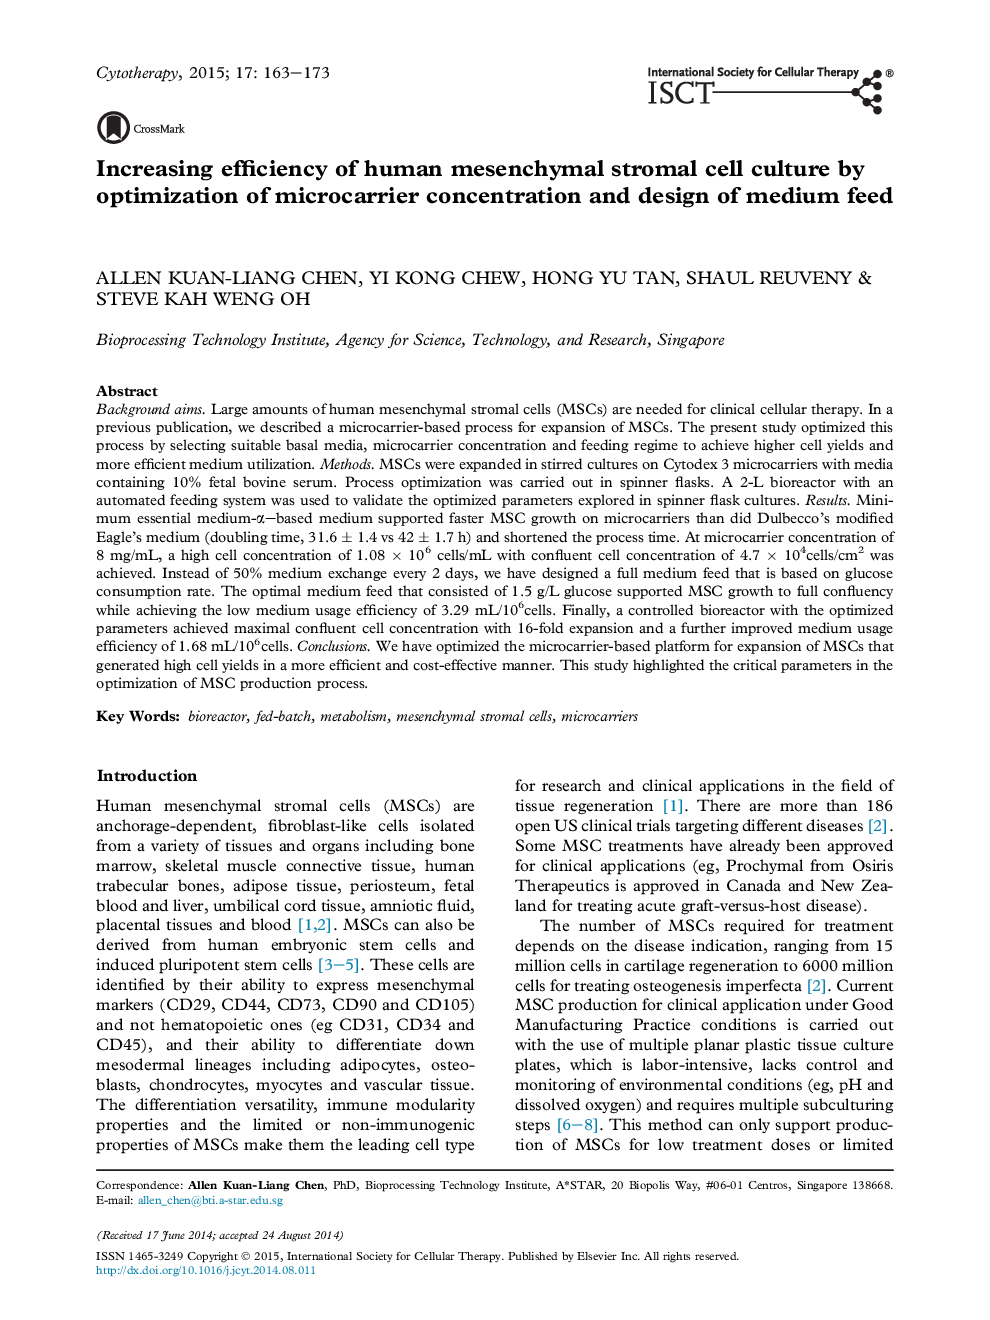 Increasing efficiency of human mesenchymal stromal cell culture by optimization of microcarrier concentration and design of medium feed